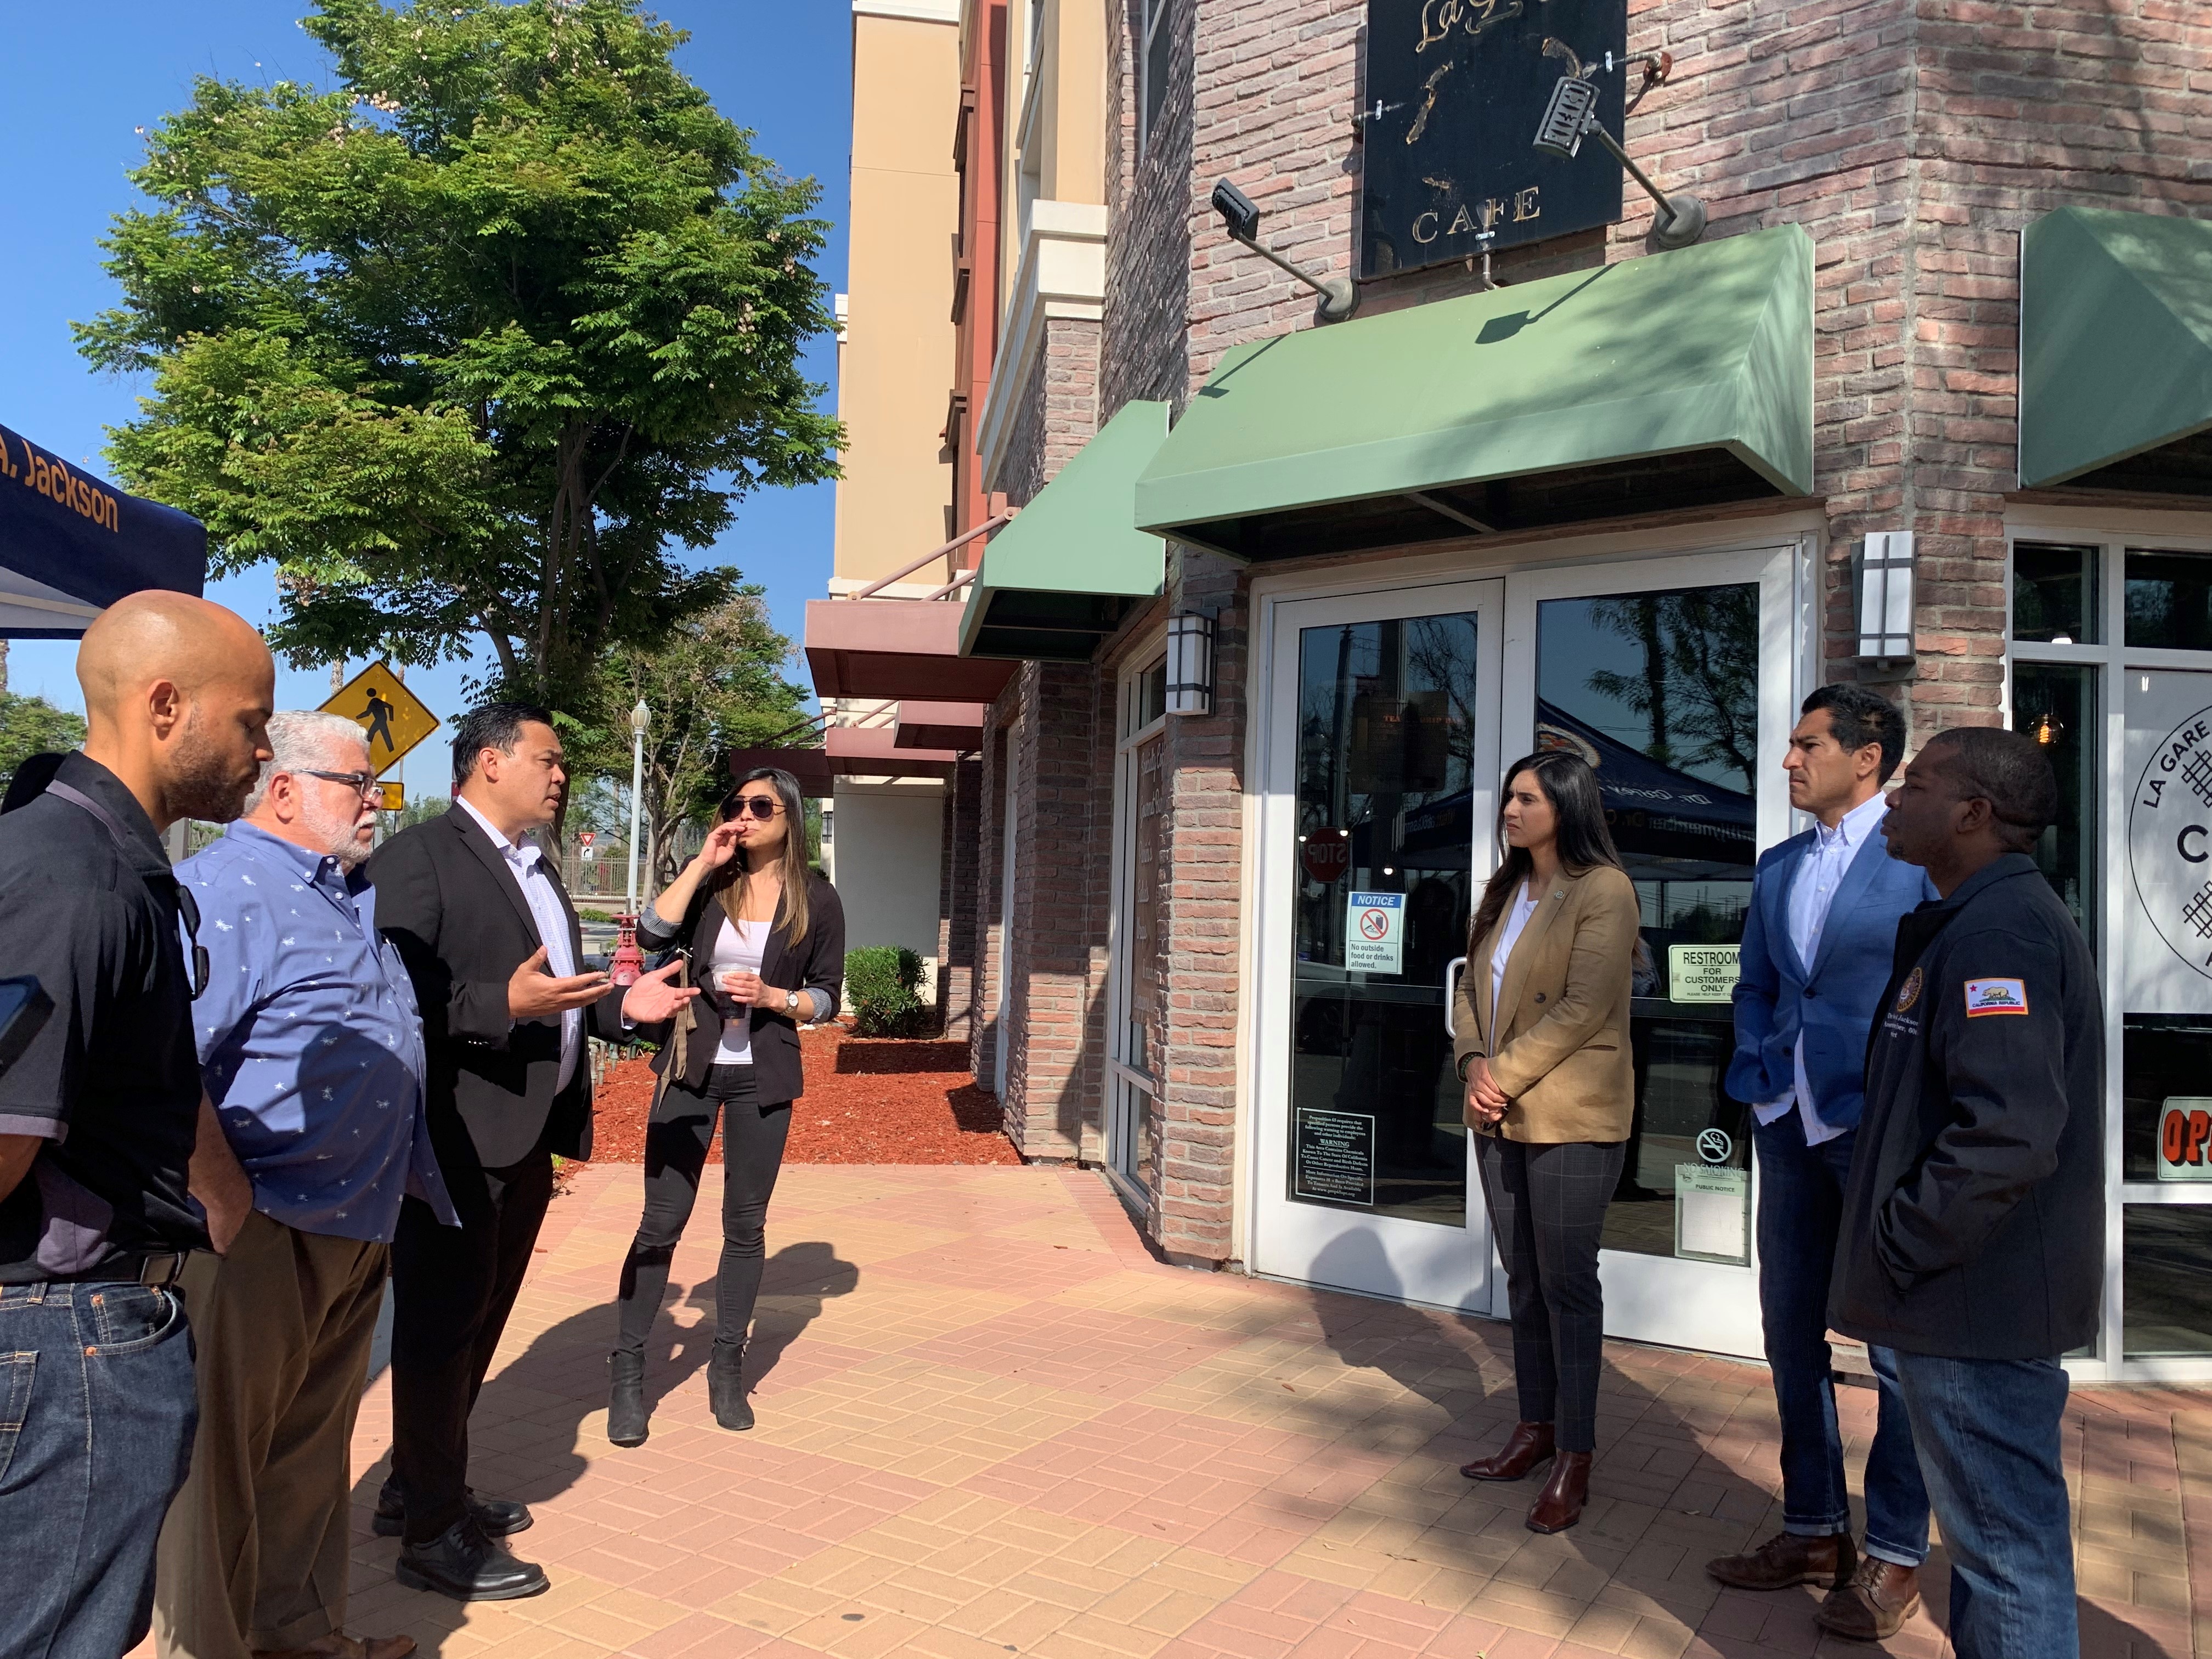 Tour in Downtown Perris with elected officials. In front of a coffee house.